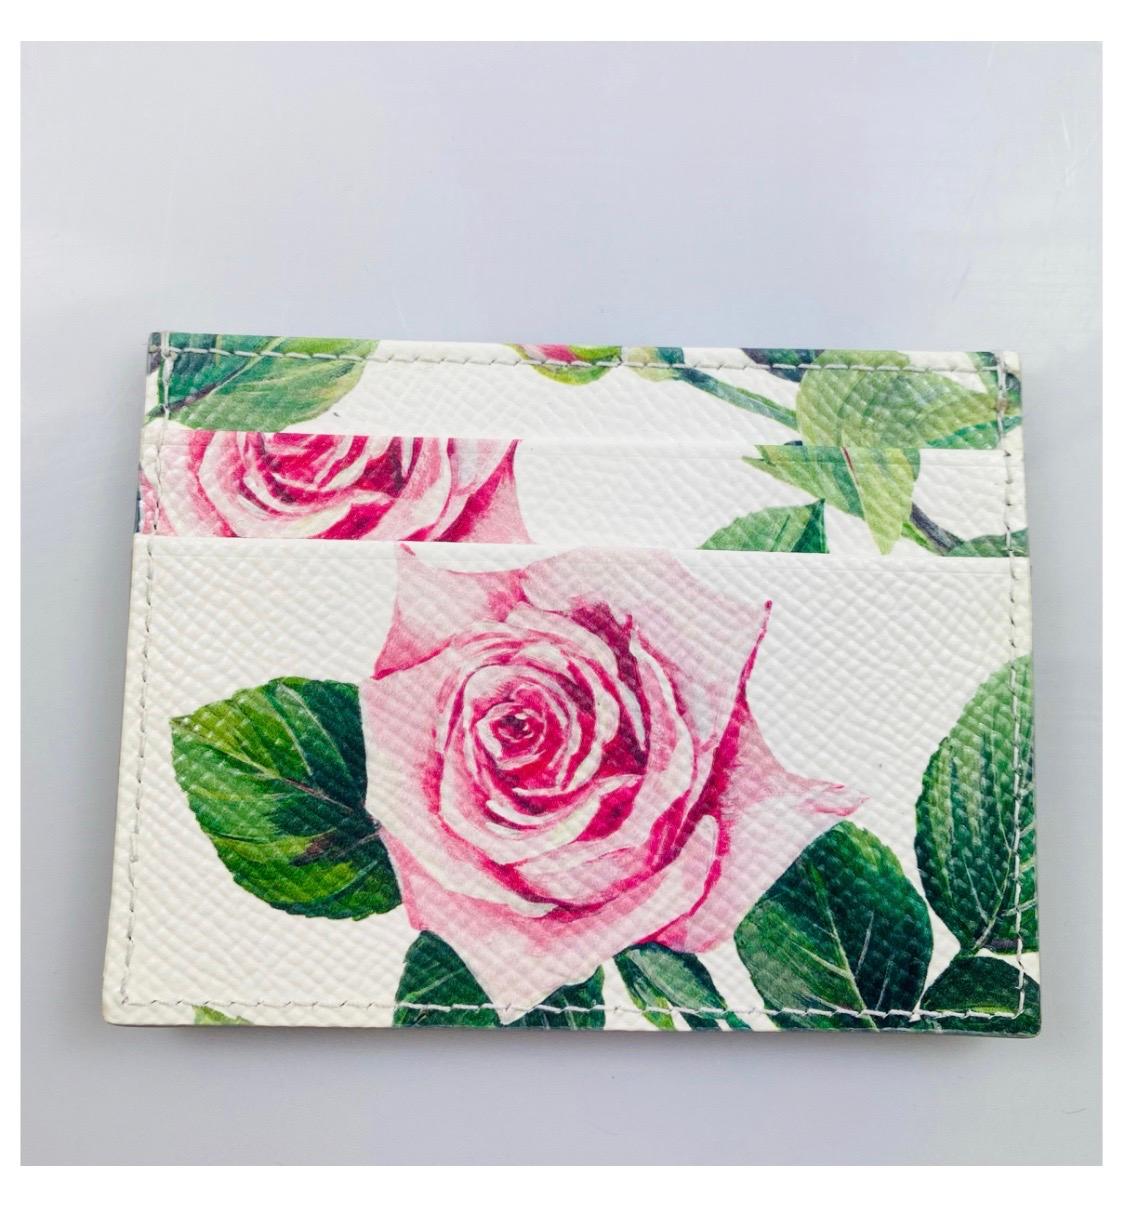  Dolce & Gabbana Tropical Rose
printed cardholder

Grained calfskin card holder in white
featuring graphic floral pattern printed
in multicolor throughout. Logo
hardware at face. Four card slots and
one note slot. Black textile lining. Gold-

tone